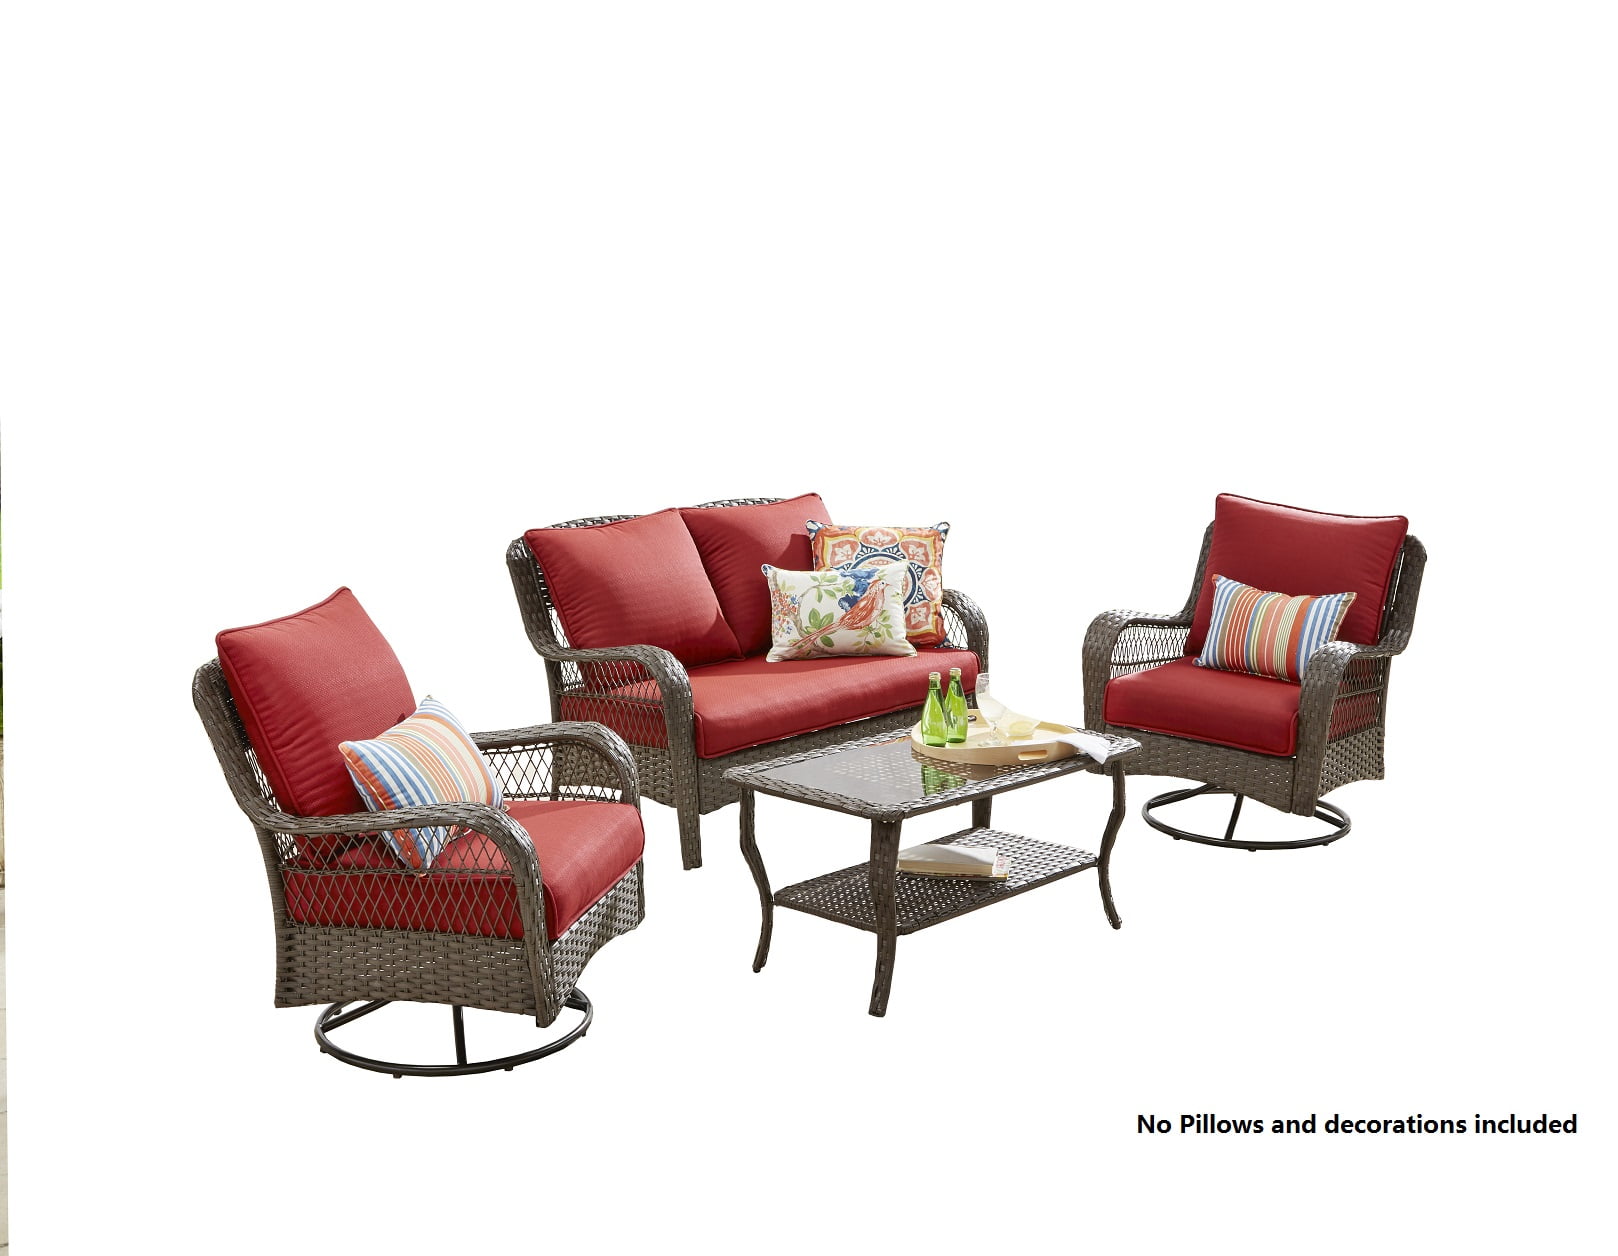 Wicker Patio Furniture Conversation Set, Outdoor Furniture Set With Swivel Chairs